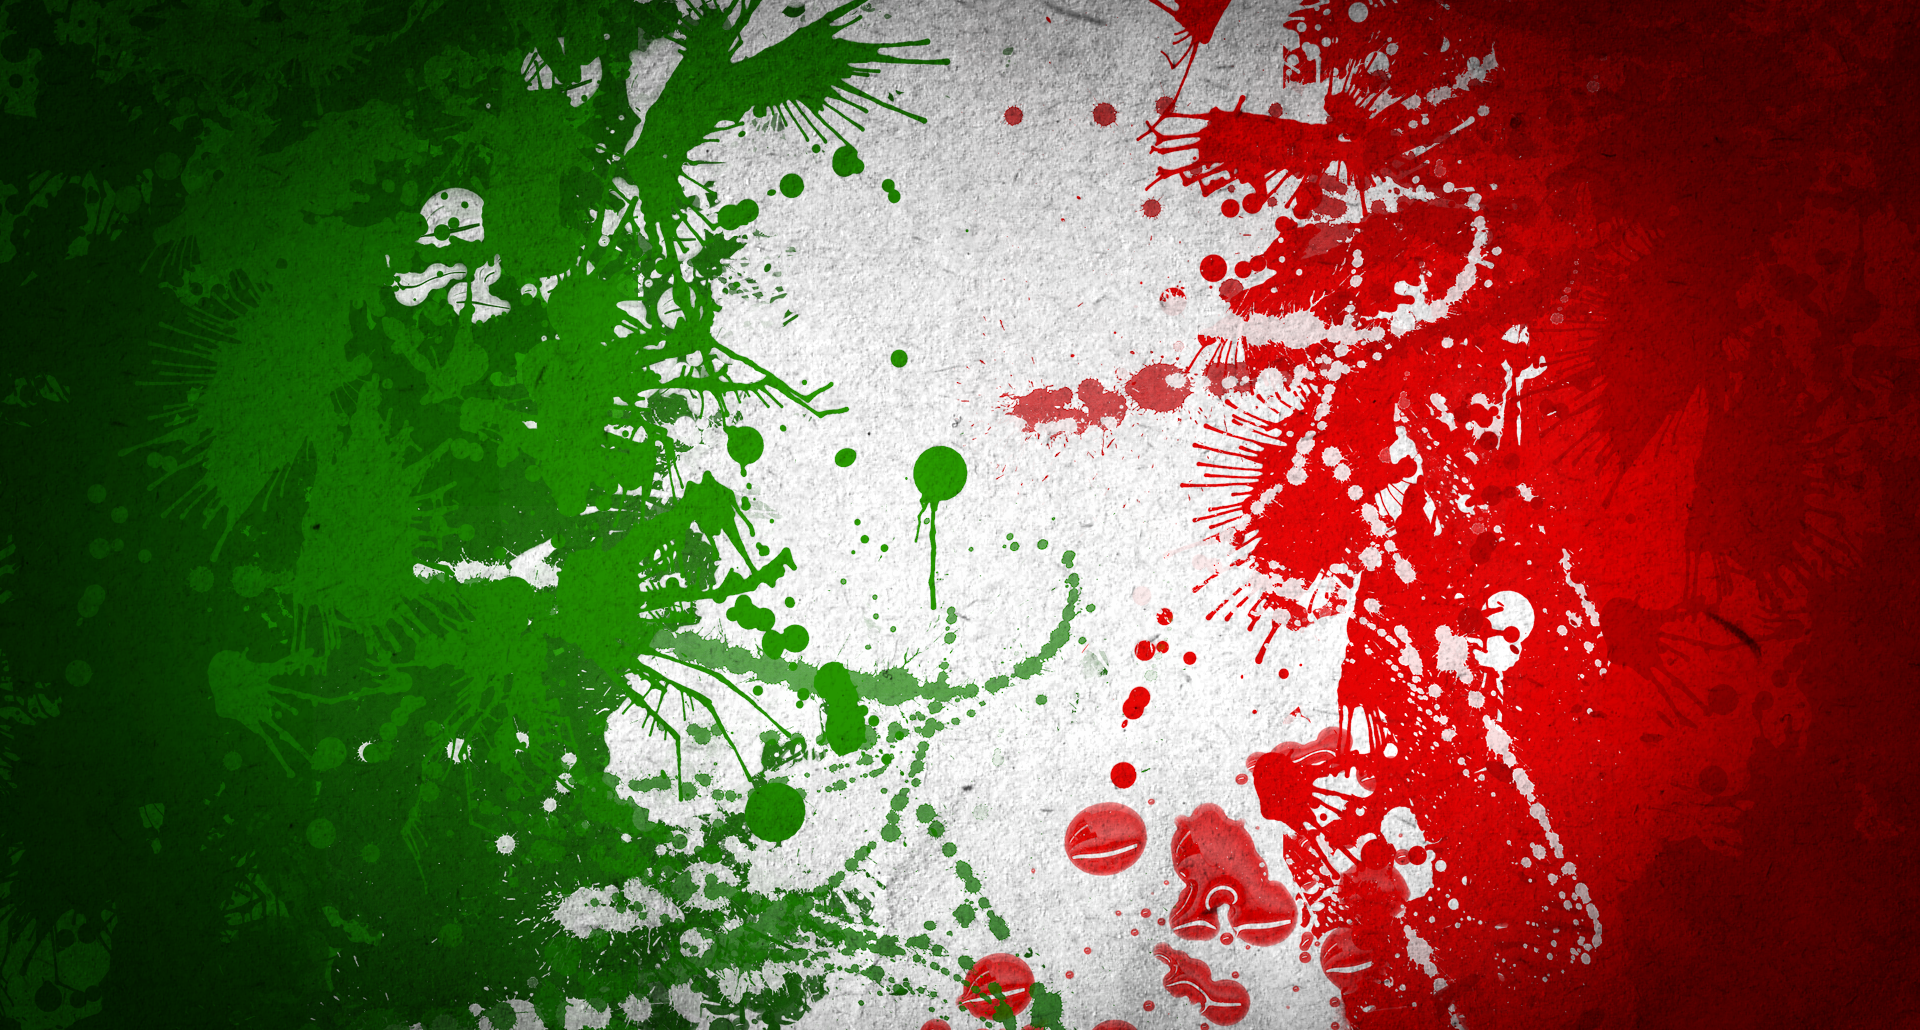 HD Wallpaper Ining Search Terms Mexican Flag Cool Mexico Car